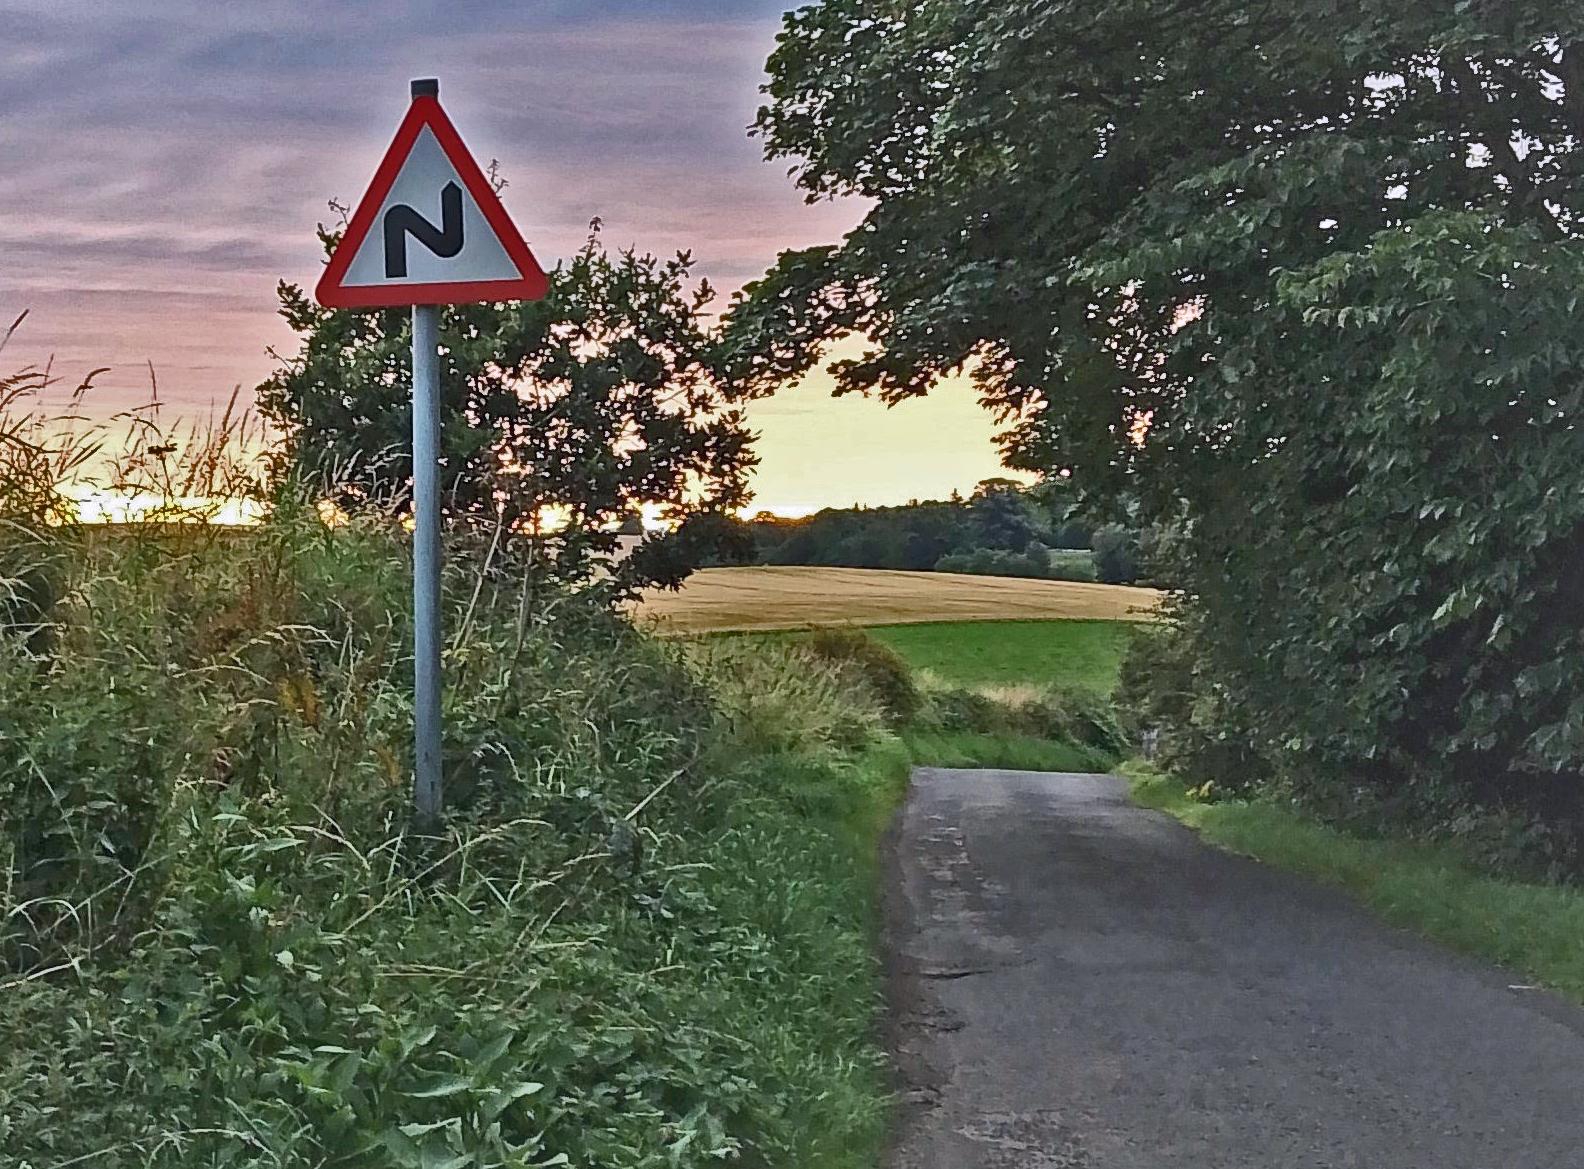 Road sign with countryside and road